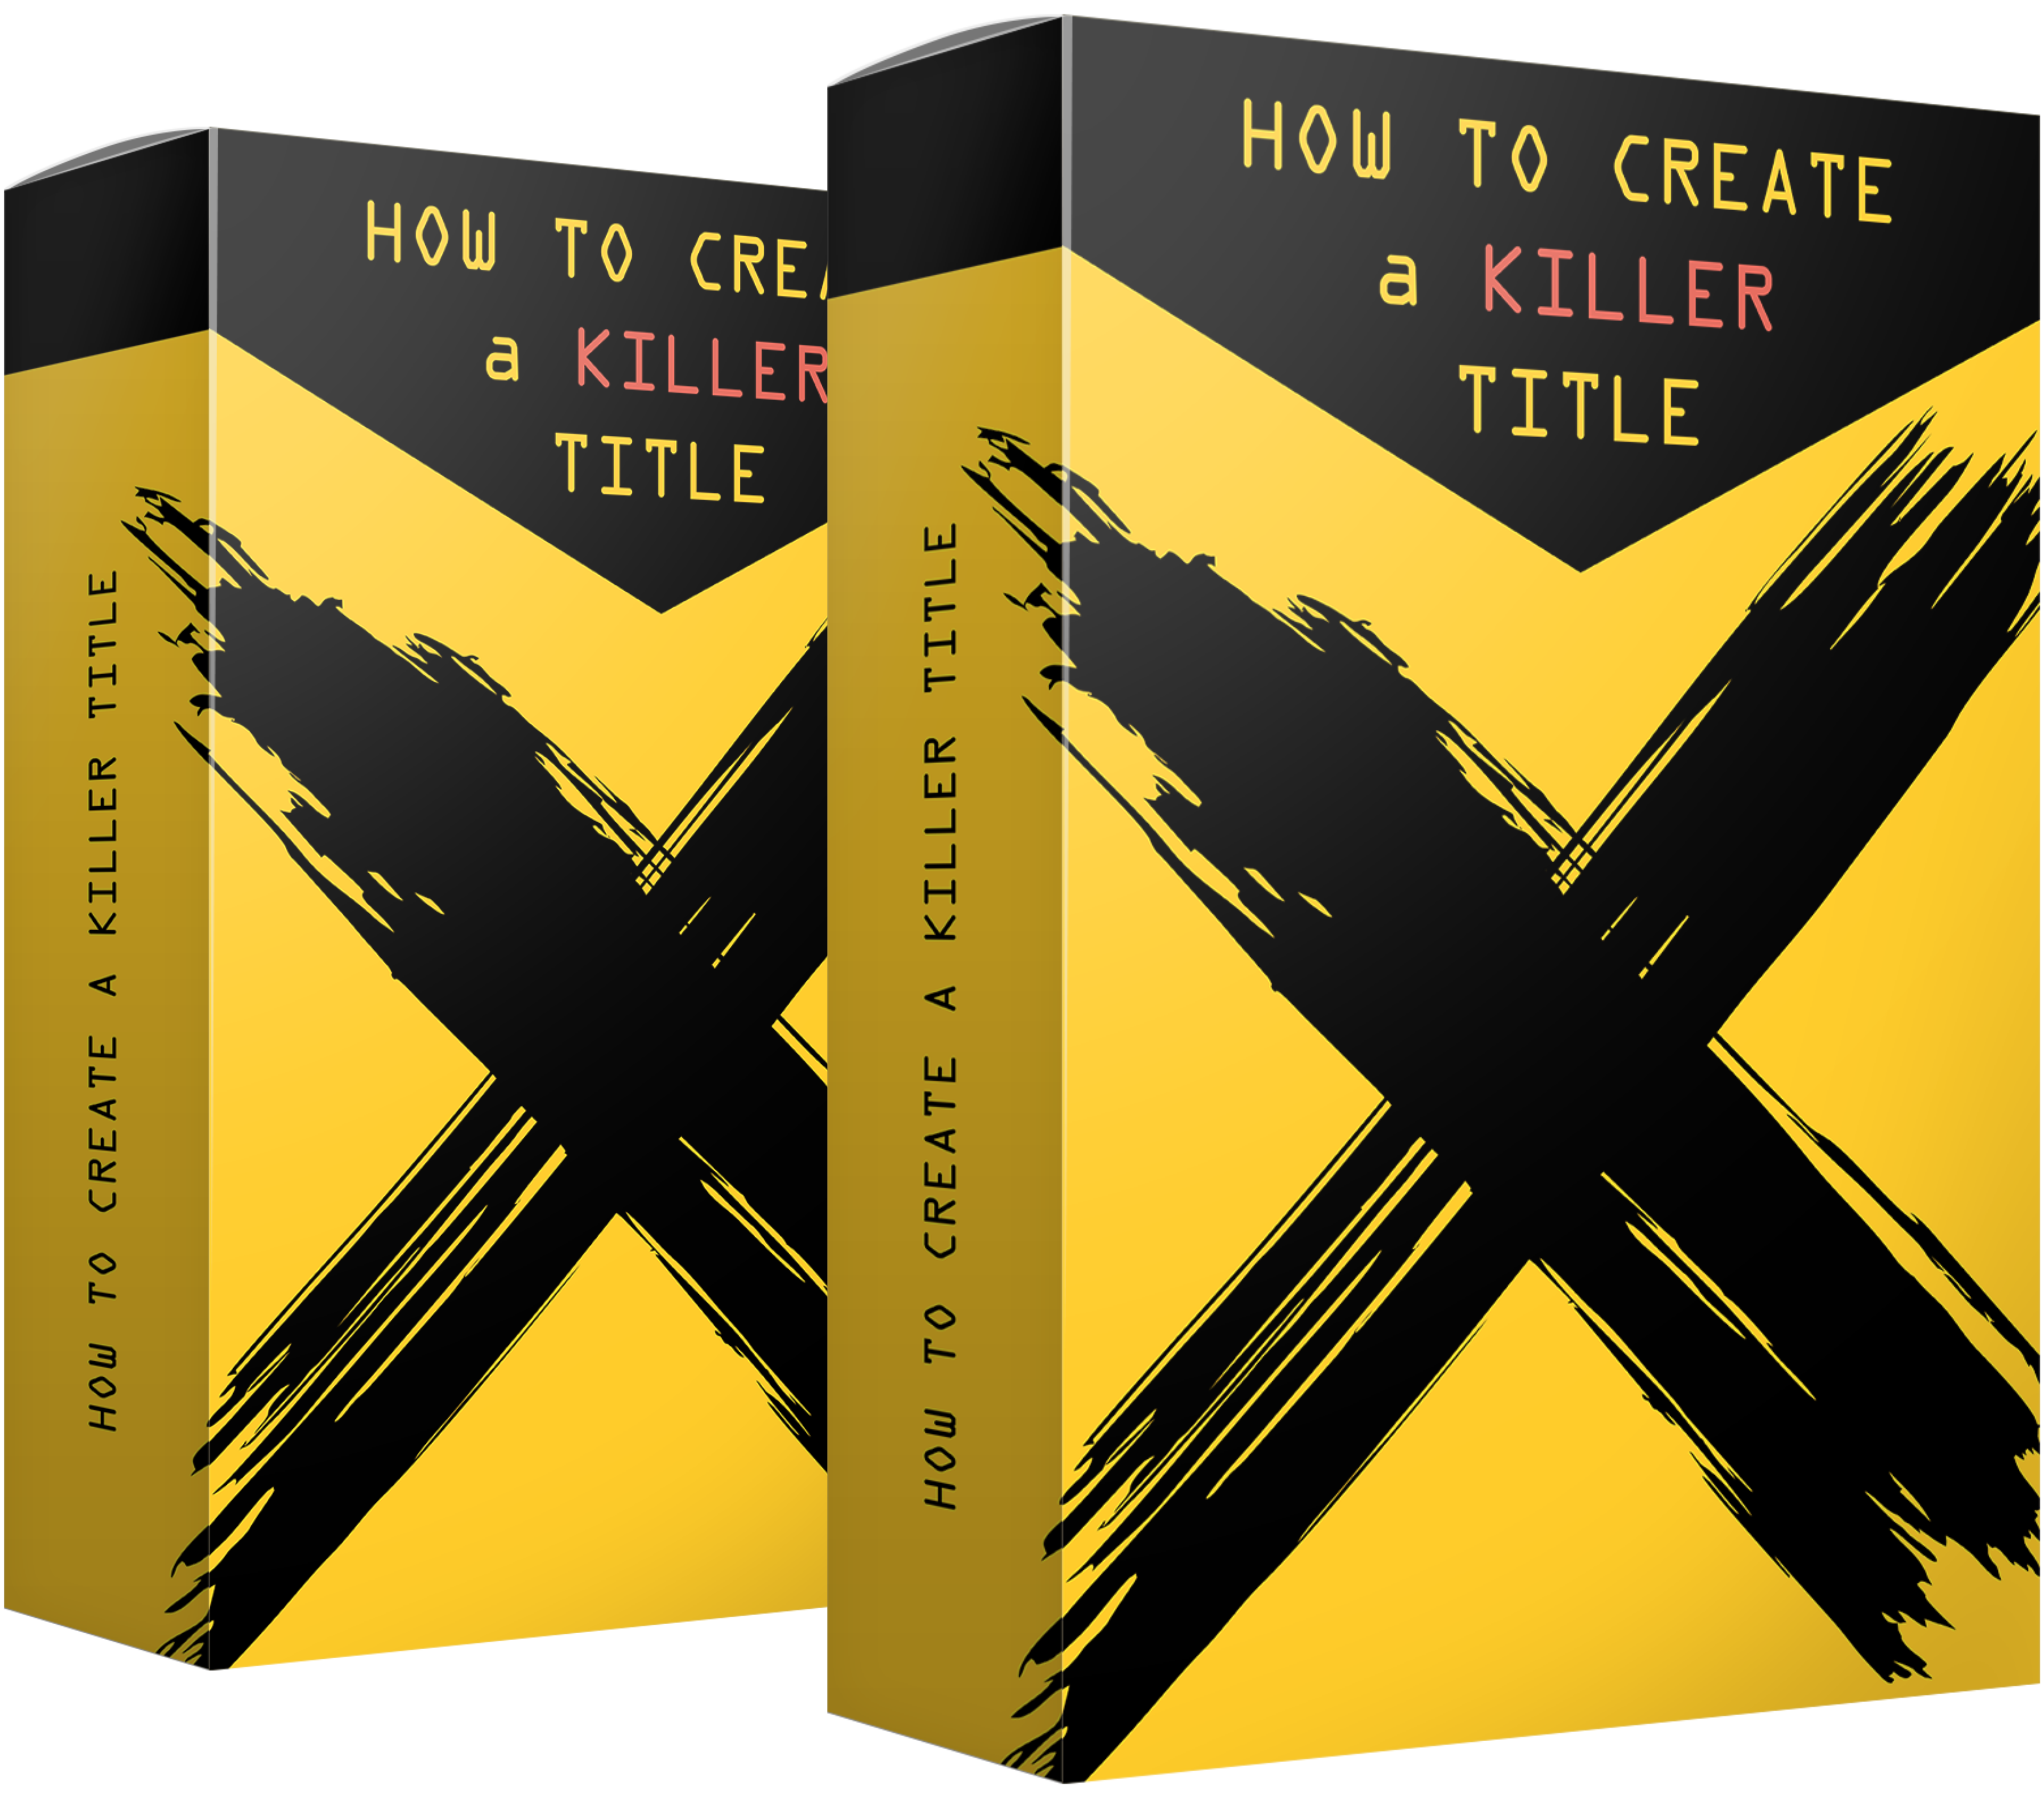 How%20to%20create%20a%20killer%20title Brand NEW Software Automates Getting 1000's of Facebook and Instagram Followers Easily